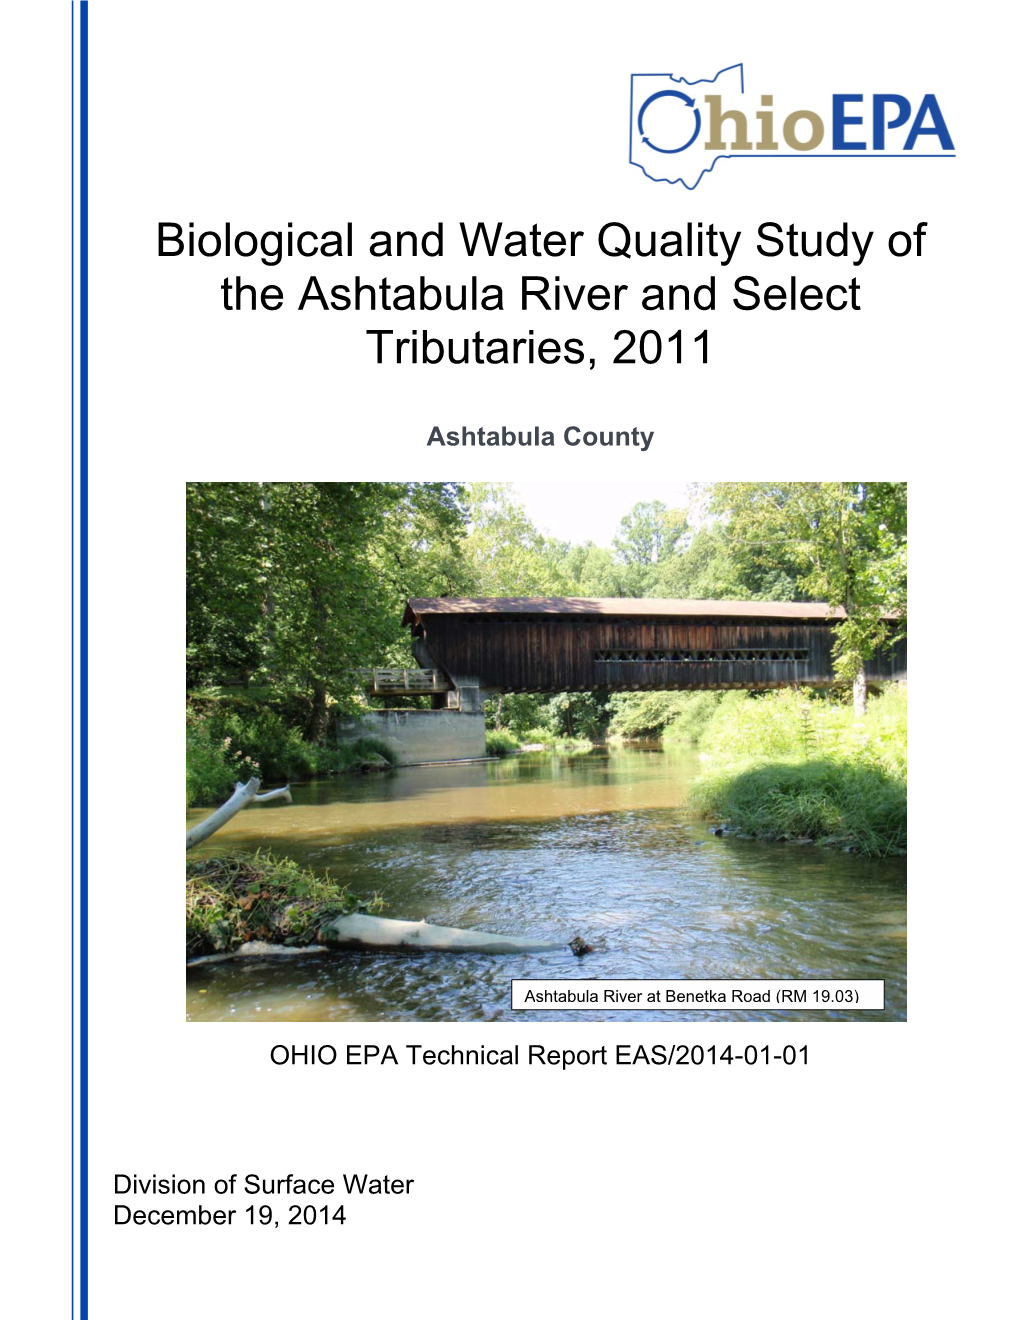 Biological and Water Quality Study of the Ashtabula River and Select Tributaries, 2011